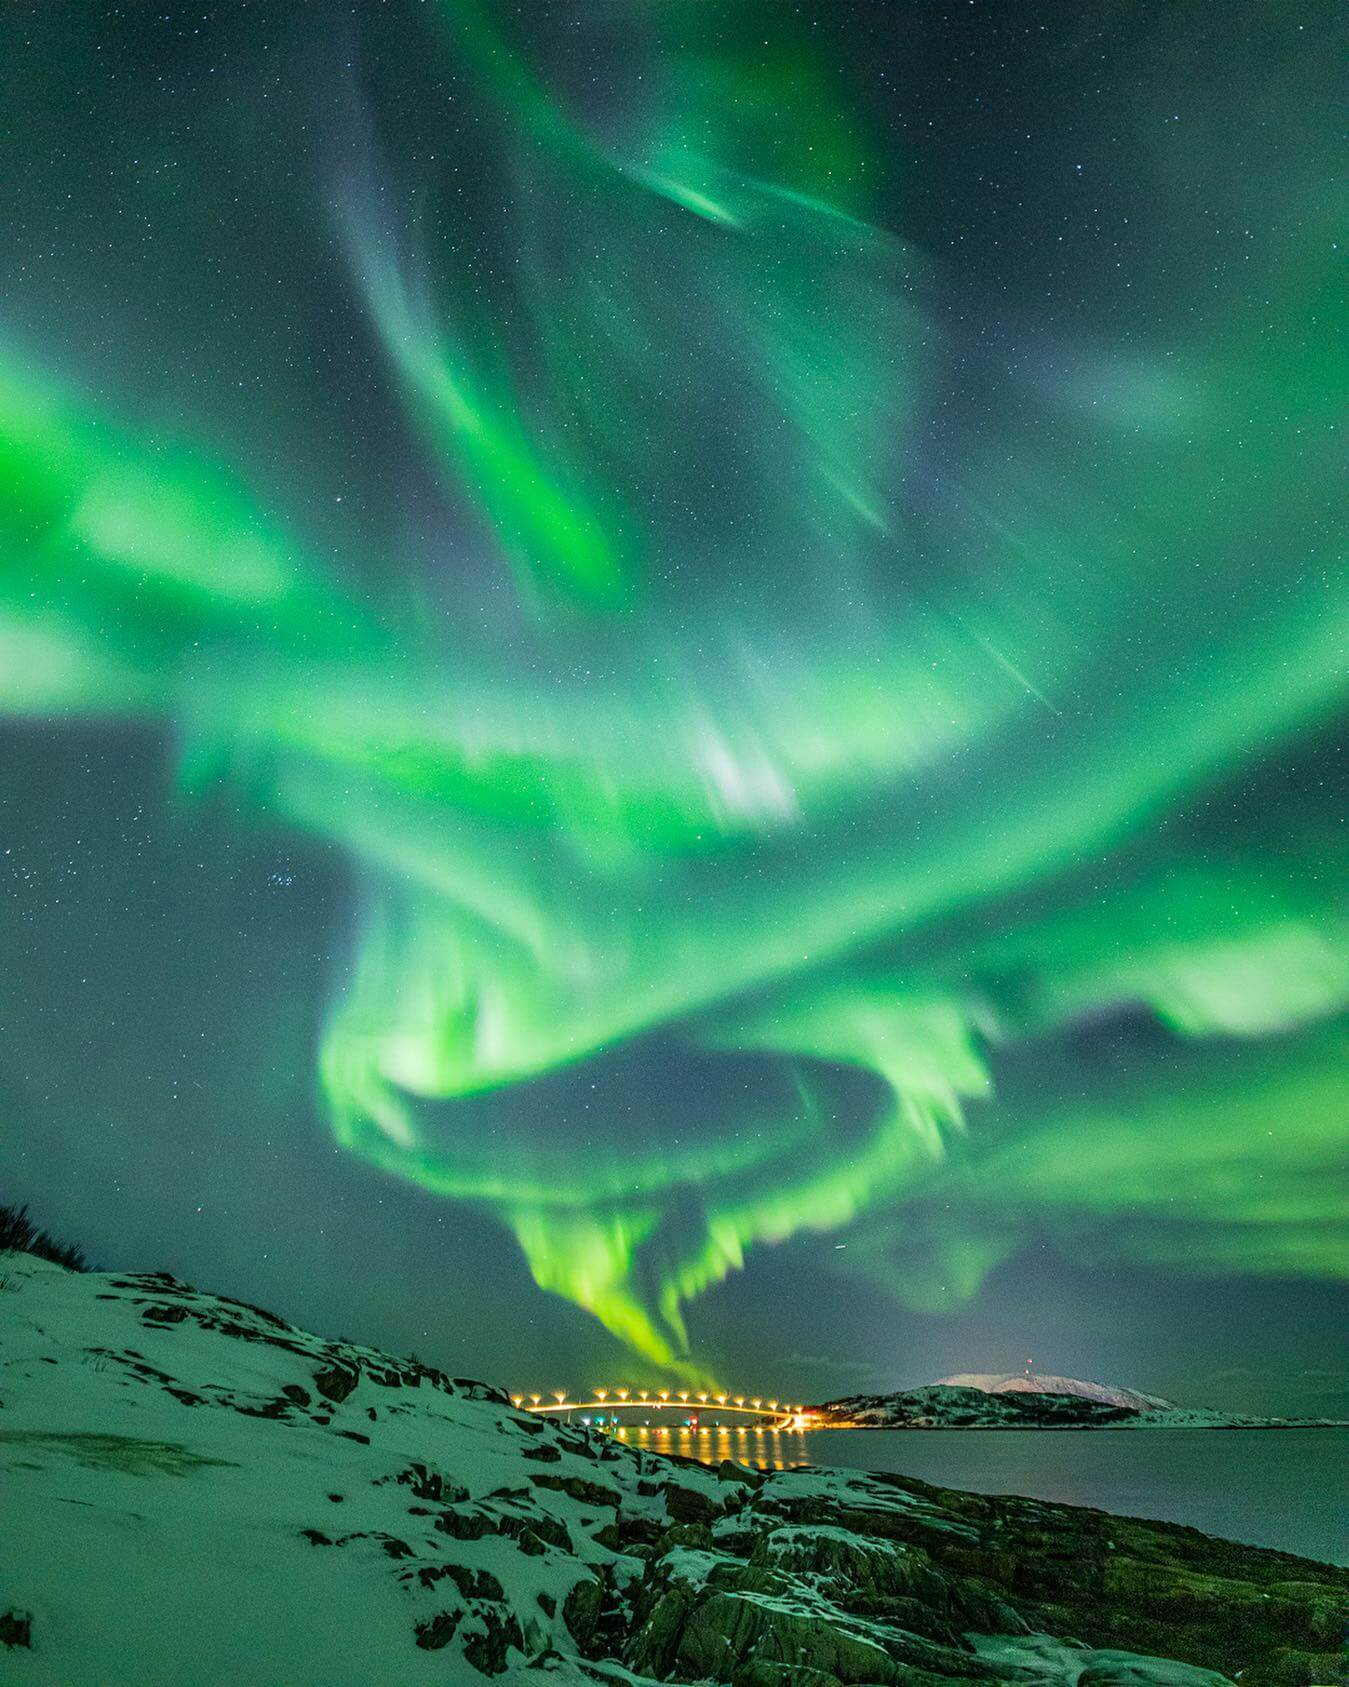 Lately the weather has been moody. As always, we are honest about the conditions and do our very best to take you to the clearest skies. 
This photo is taken end of February. 
😻
Season is almost finished and we have some availability left second part in March. 🥳
See you soon!
•
•
•
•
•

#tromsø #northernnorway #visittromso #northnorway2day #northernlights #tromsolove #naturephotography #lovenature #aurora #worldaurora #norge #norgefoto #worldaurora #visitnorway #auroraborealis #ig_nordnorge #canon #mittnorge #norwayphotos #auroraborealblog #norway #dreamchasersnorway #thebestofnorway #tromsomoment #ig_auroraborealis #natgeotravel #nortrip #honesty